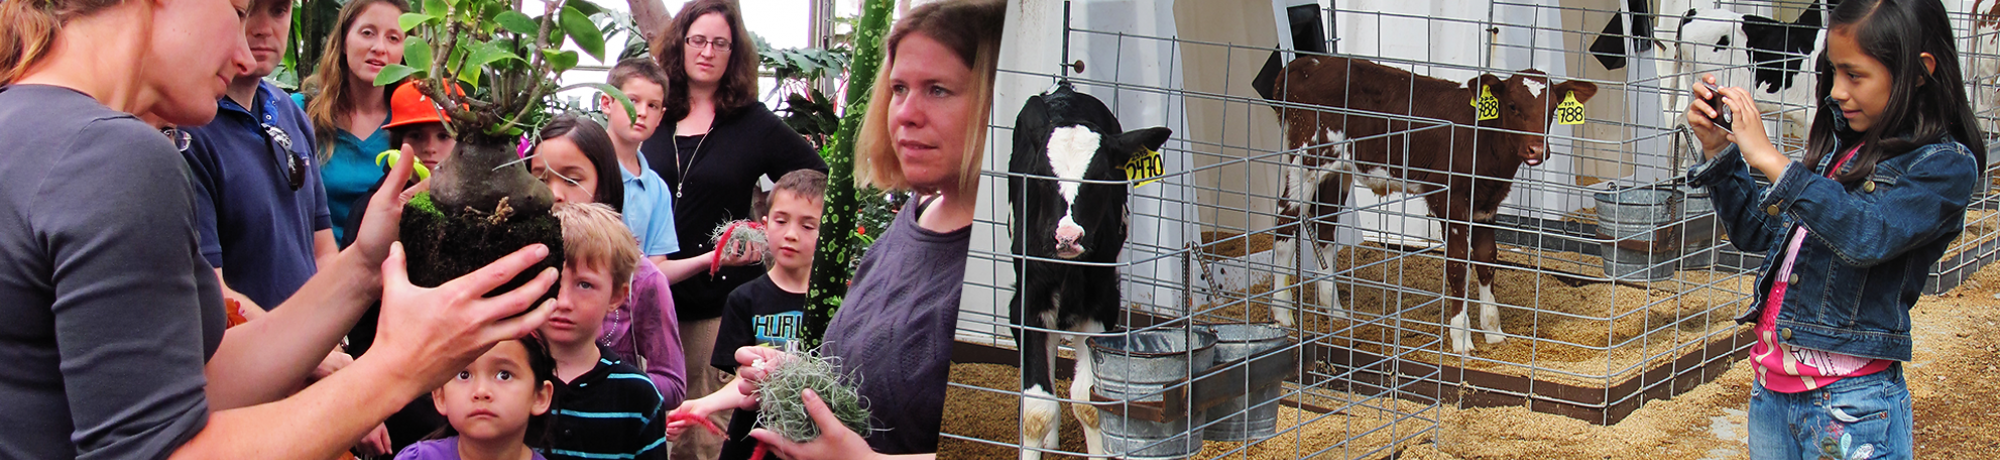 group of kids looking at a plant and visiting baby cows